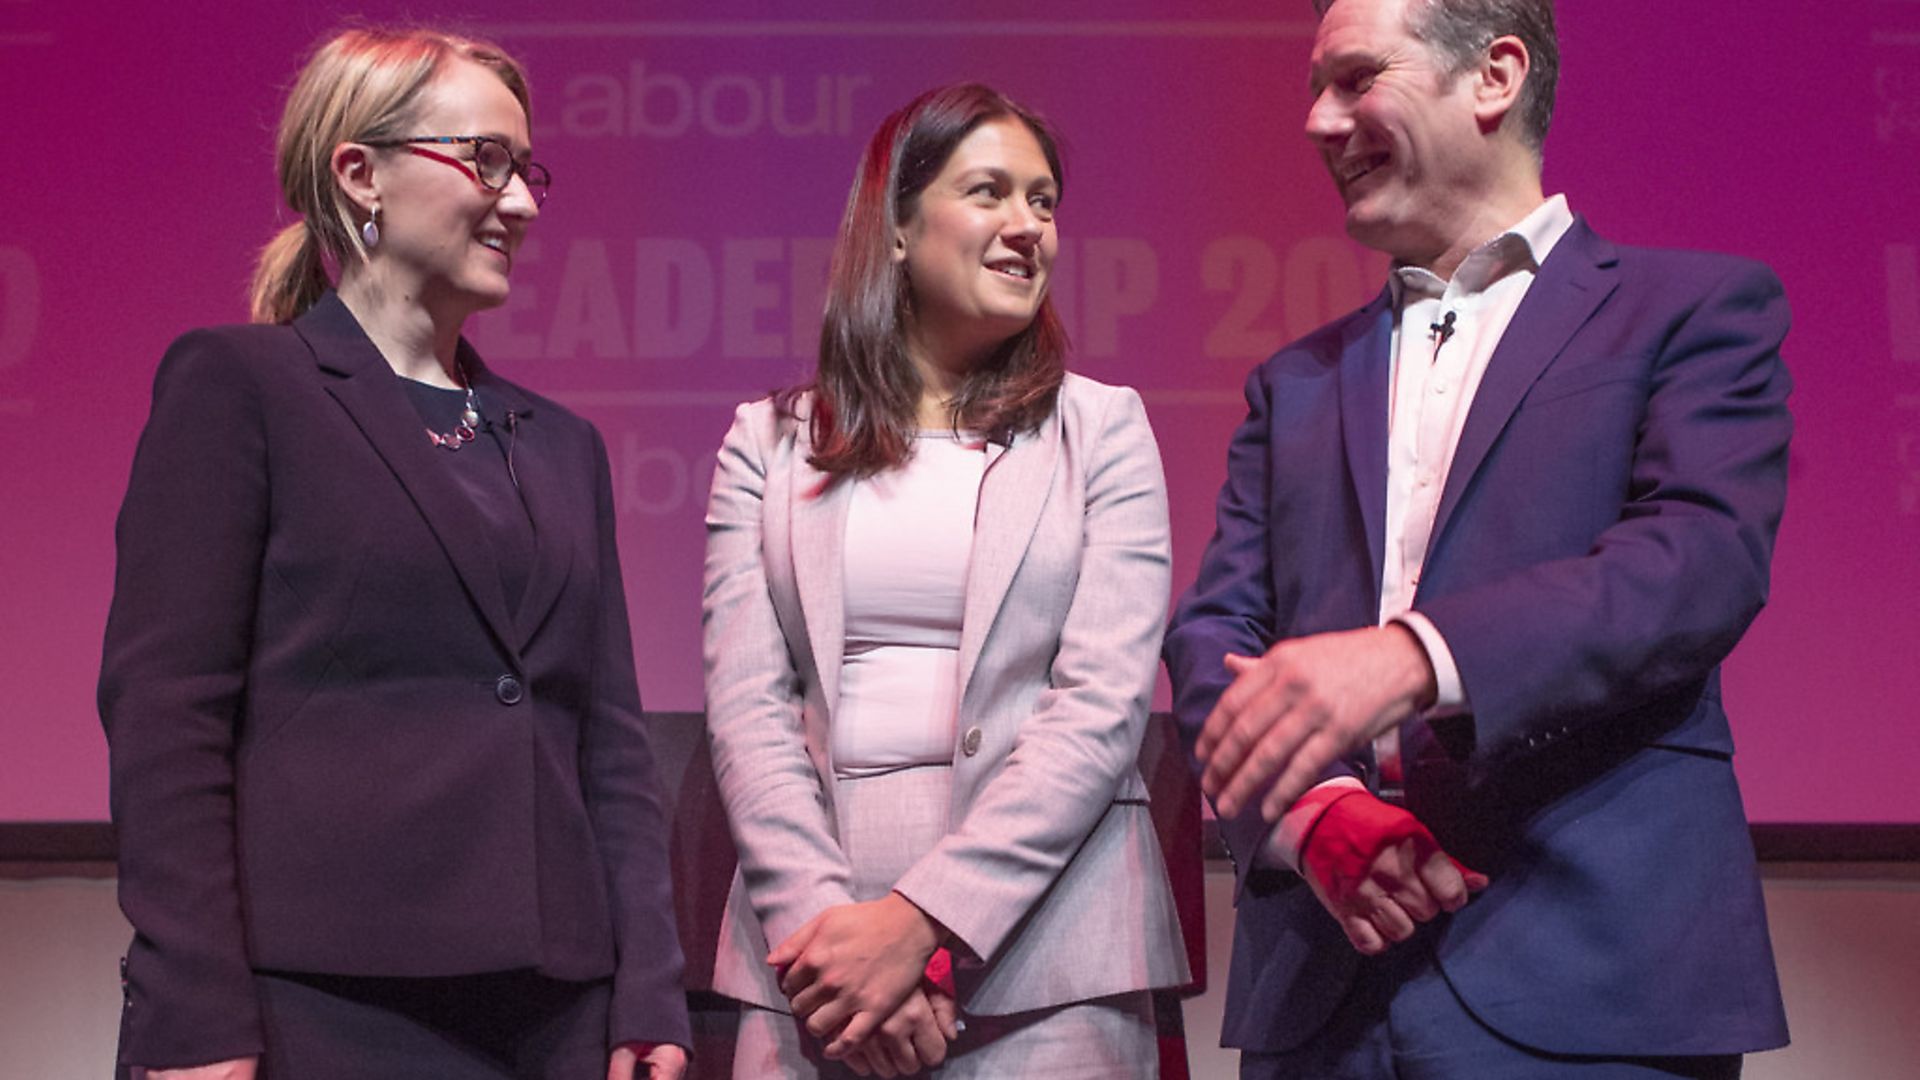 (left to right) Labour leadership candidates Rebecca Long-Bailey, Lisa Nandy and Sir Keir Starmer after the Labour leadership hustings at the SEC centre, Glasgow. Photograph: Jane Barlow/PA. - Credit: PA